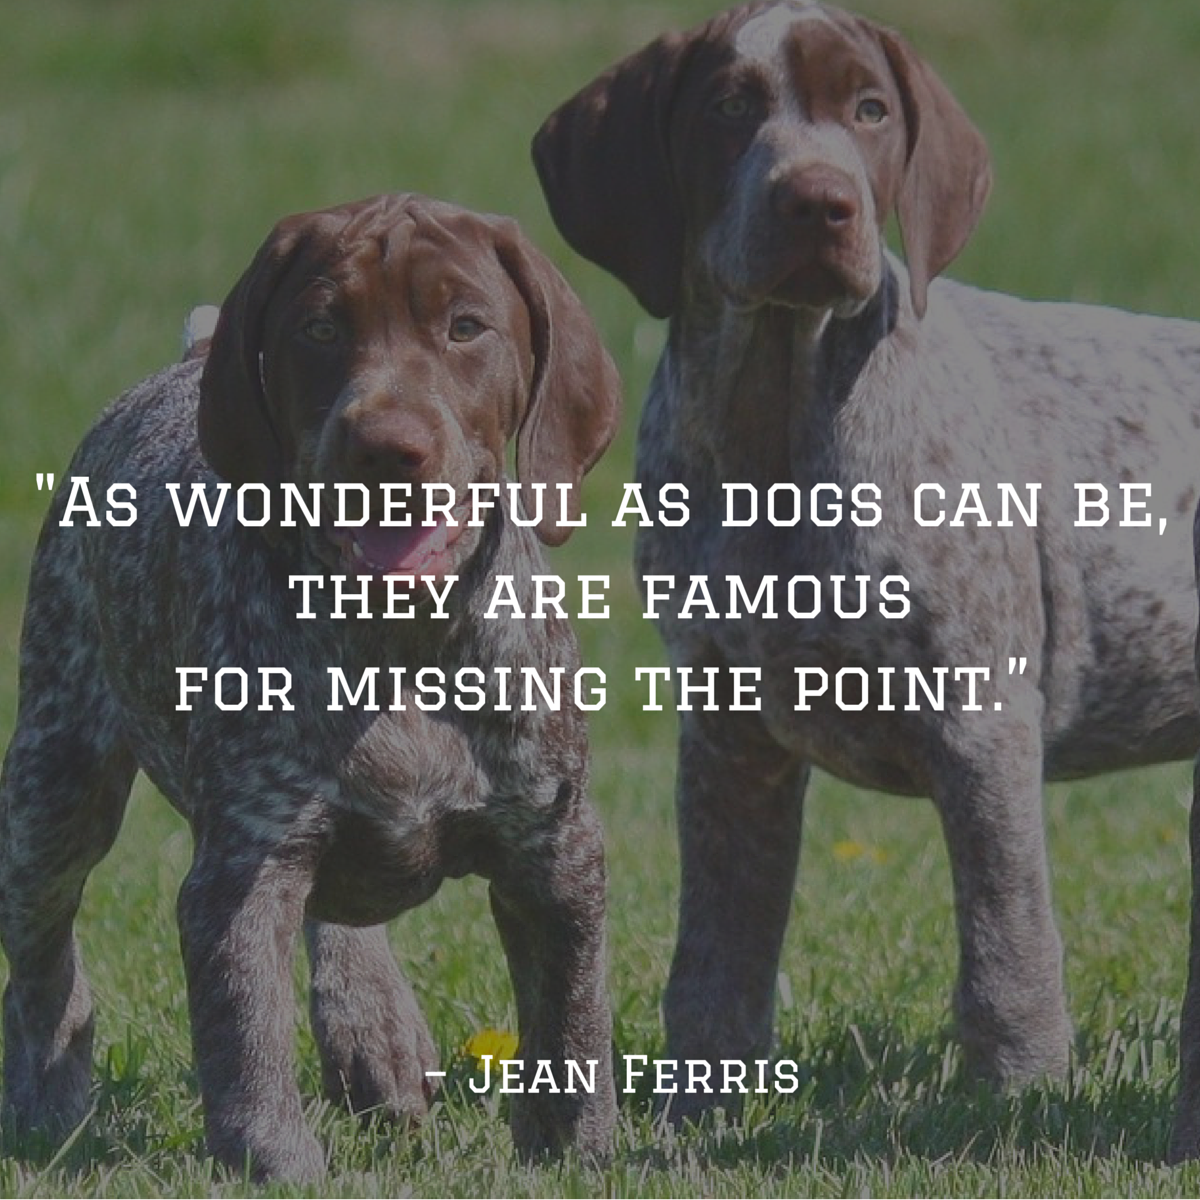 Dog Quotes — We Rounded up the Best of the Best